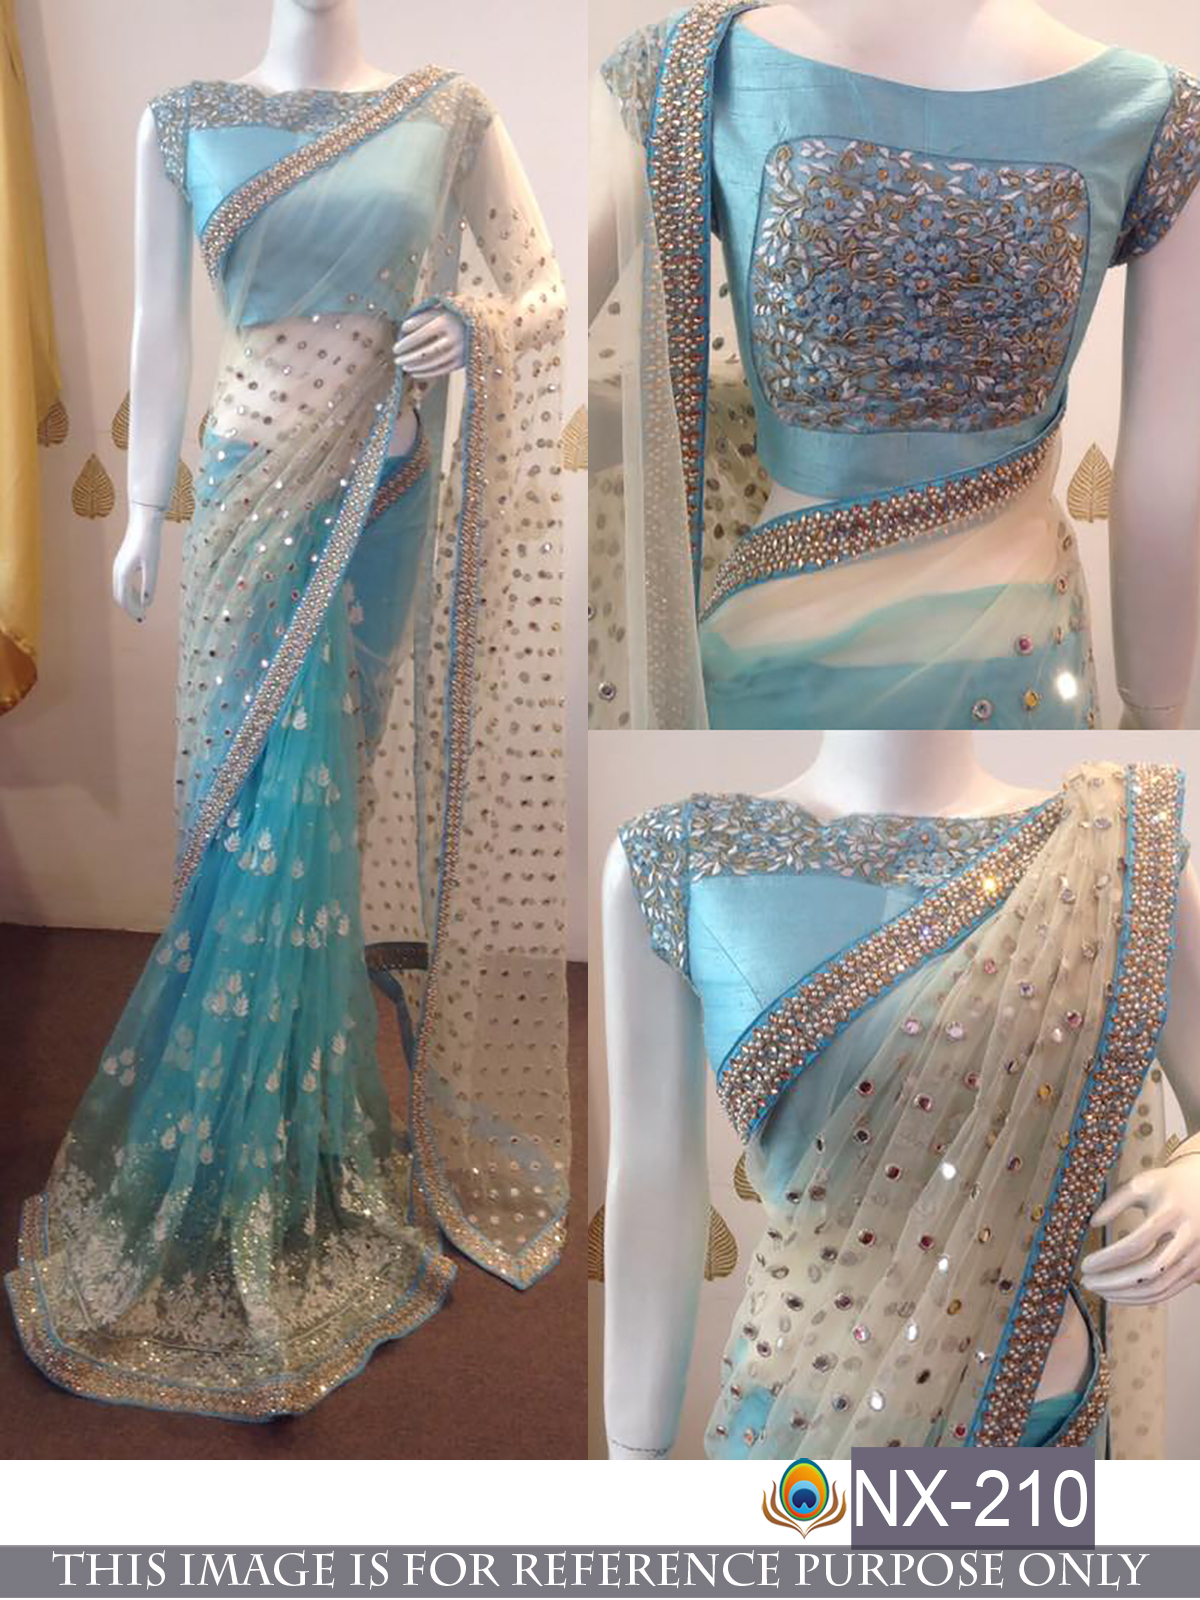 Mindblowing Sarees Collection For Parties And Weddings At Wh...